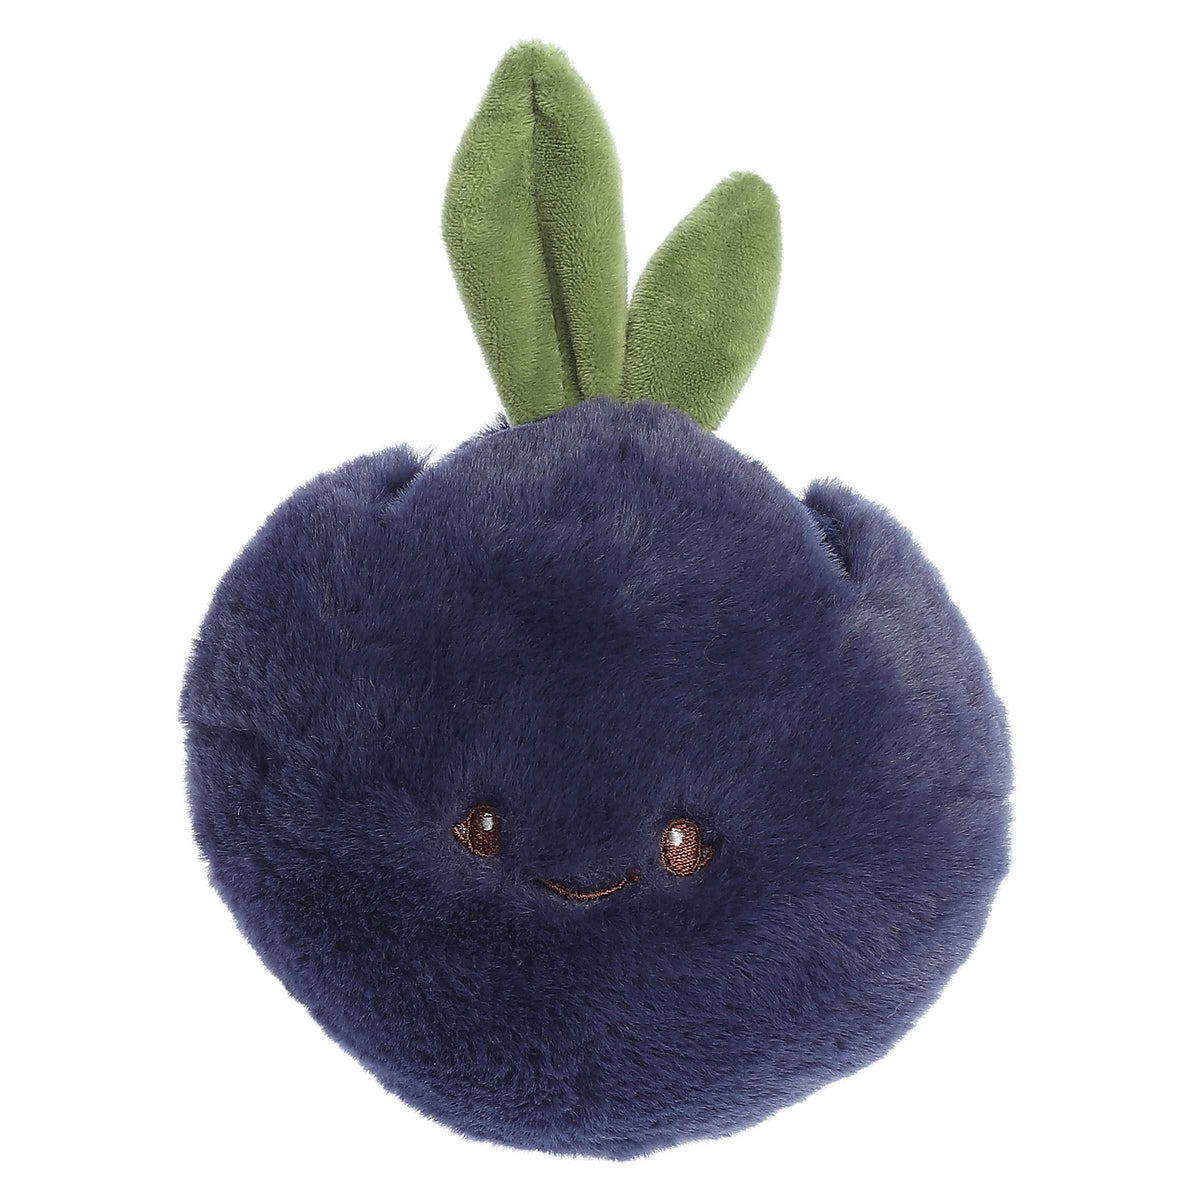 Adorable Blueberry Plush with a dark blue round body and fur, smiling face with brown accents, and green leaf on top.